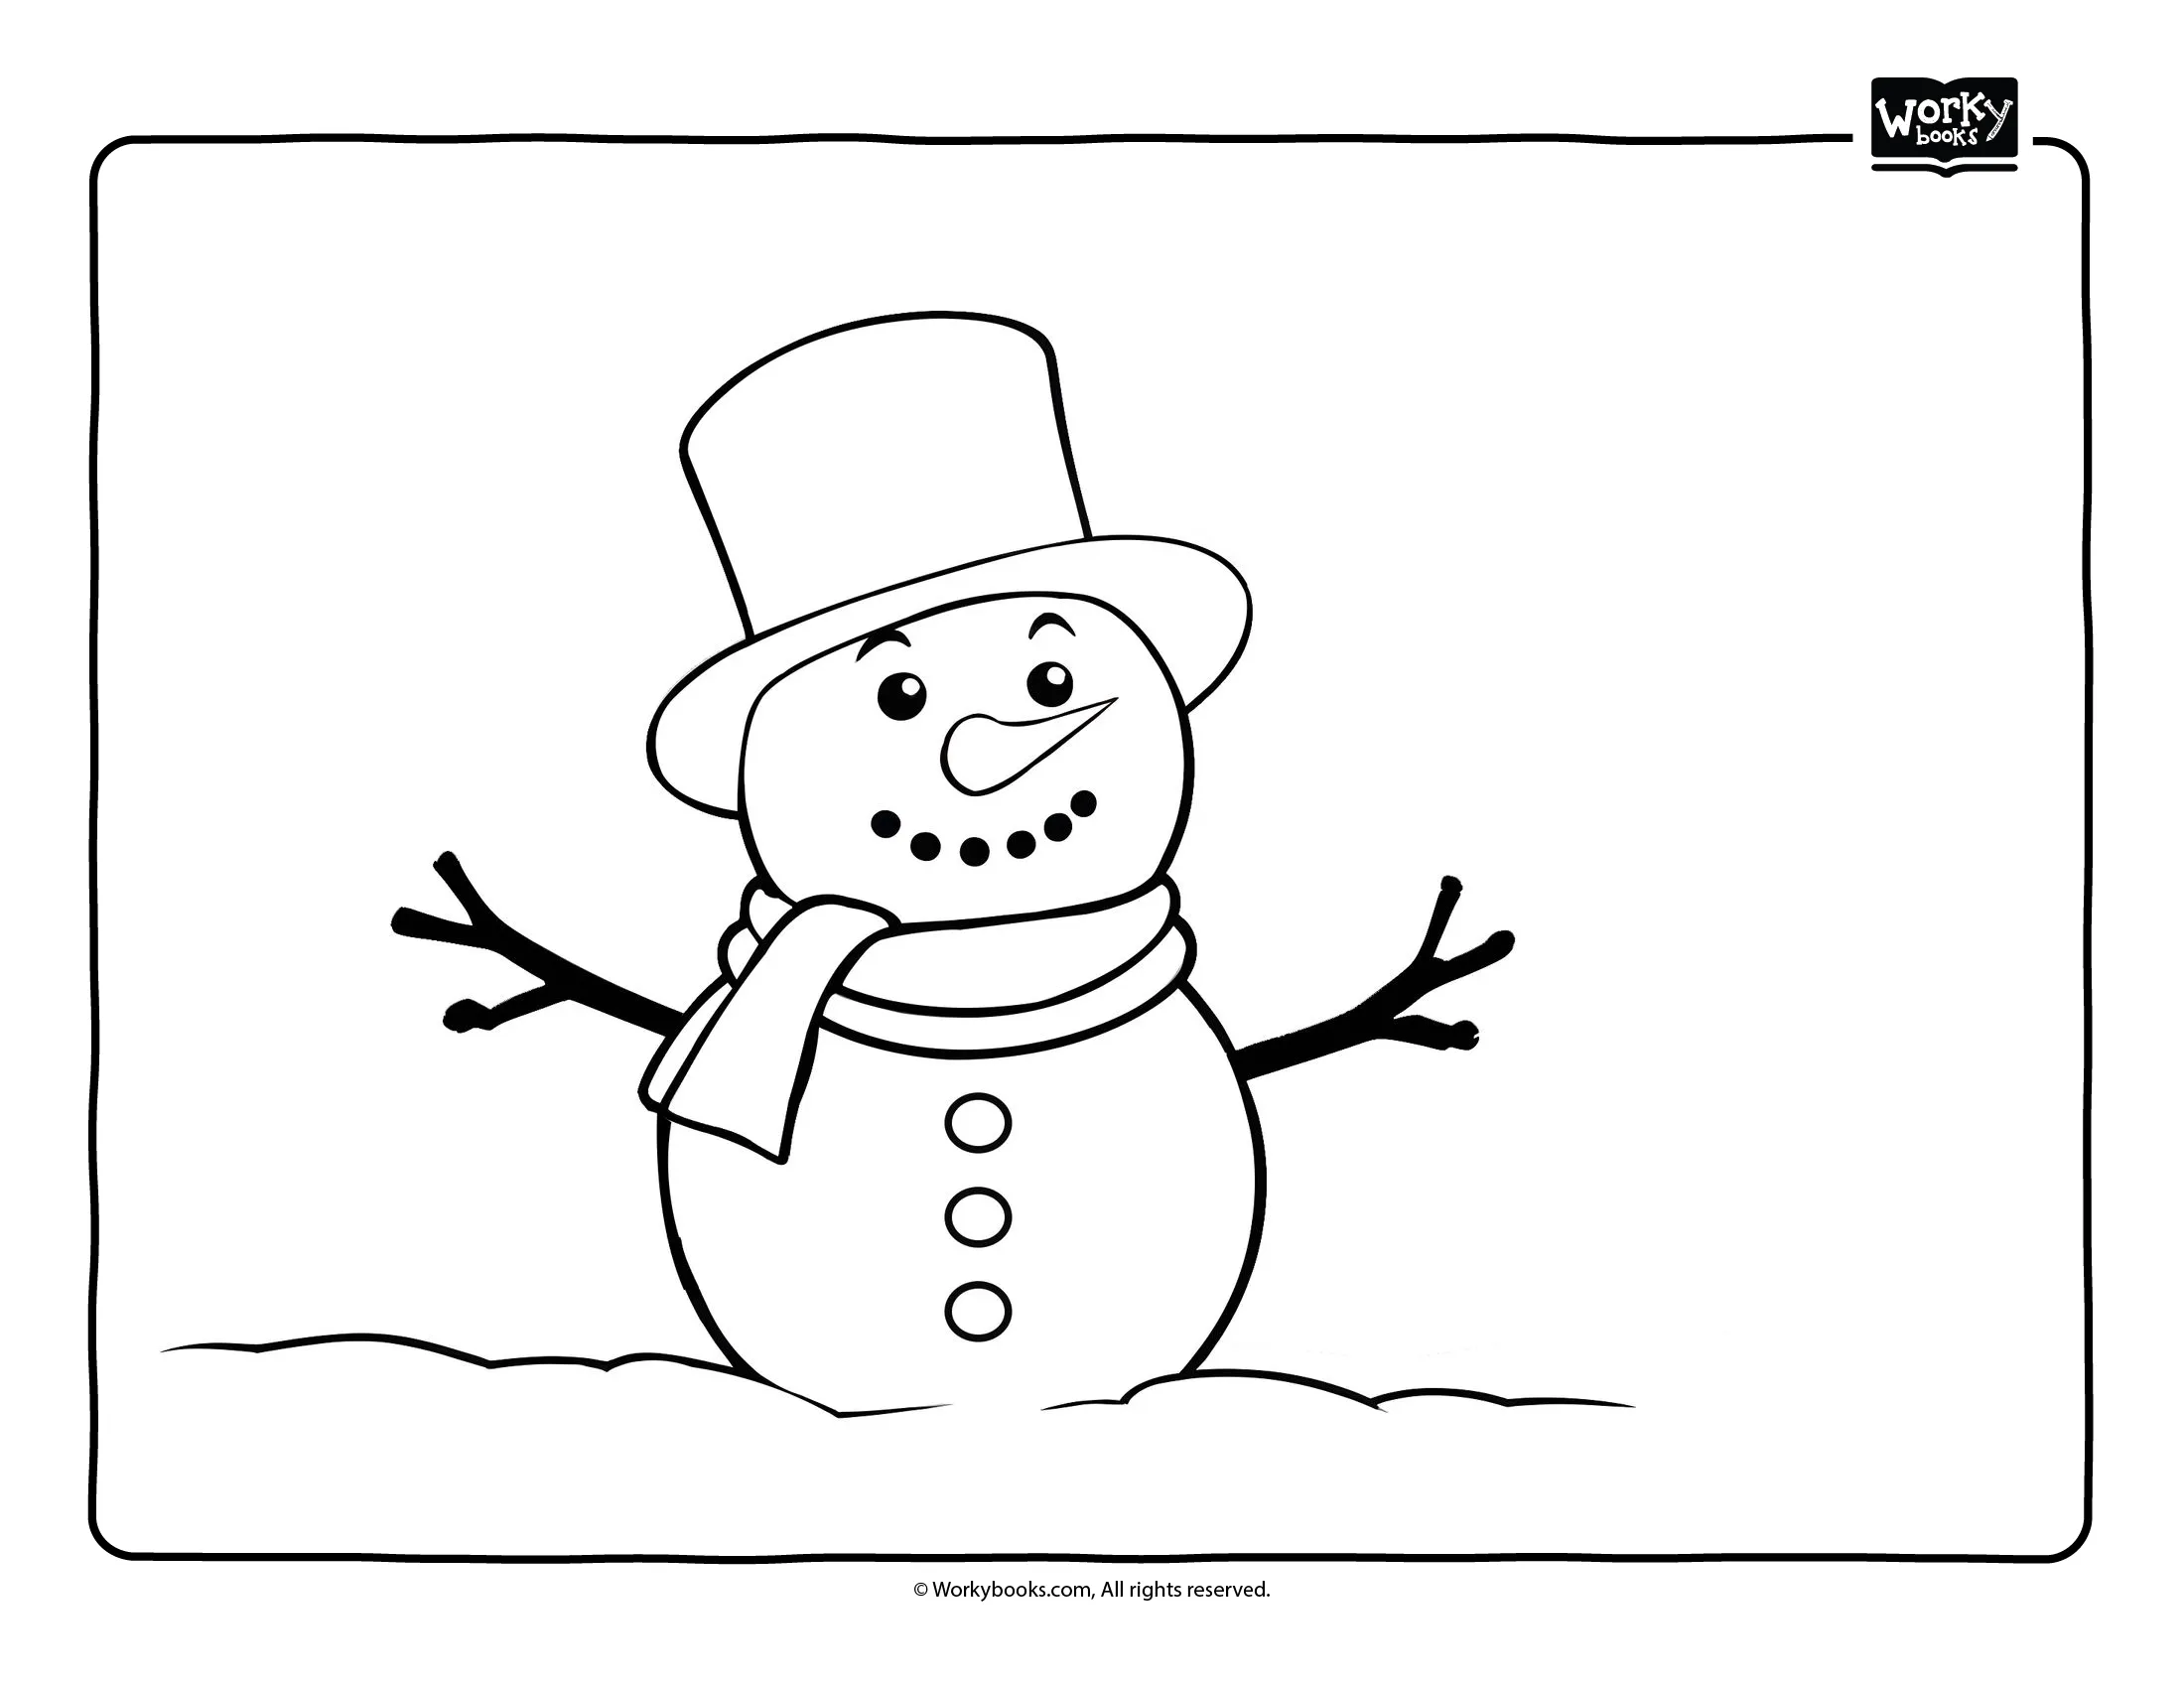 Snowman coloring page
